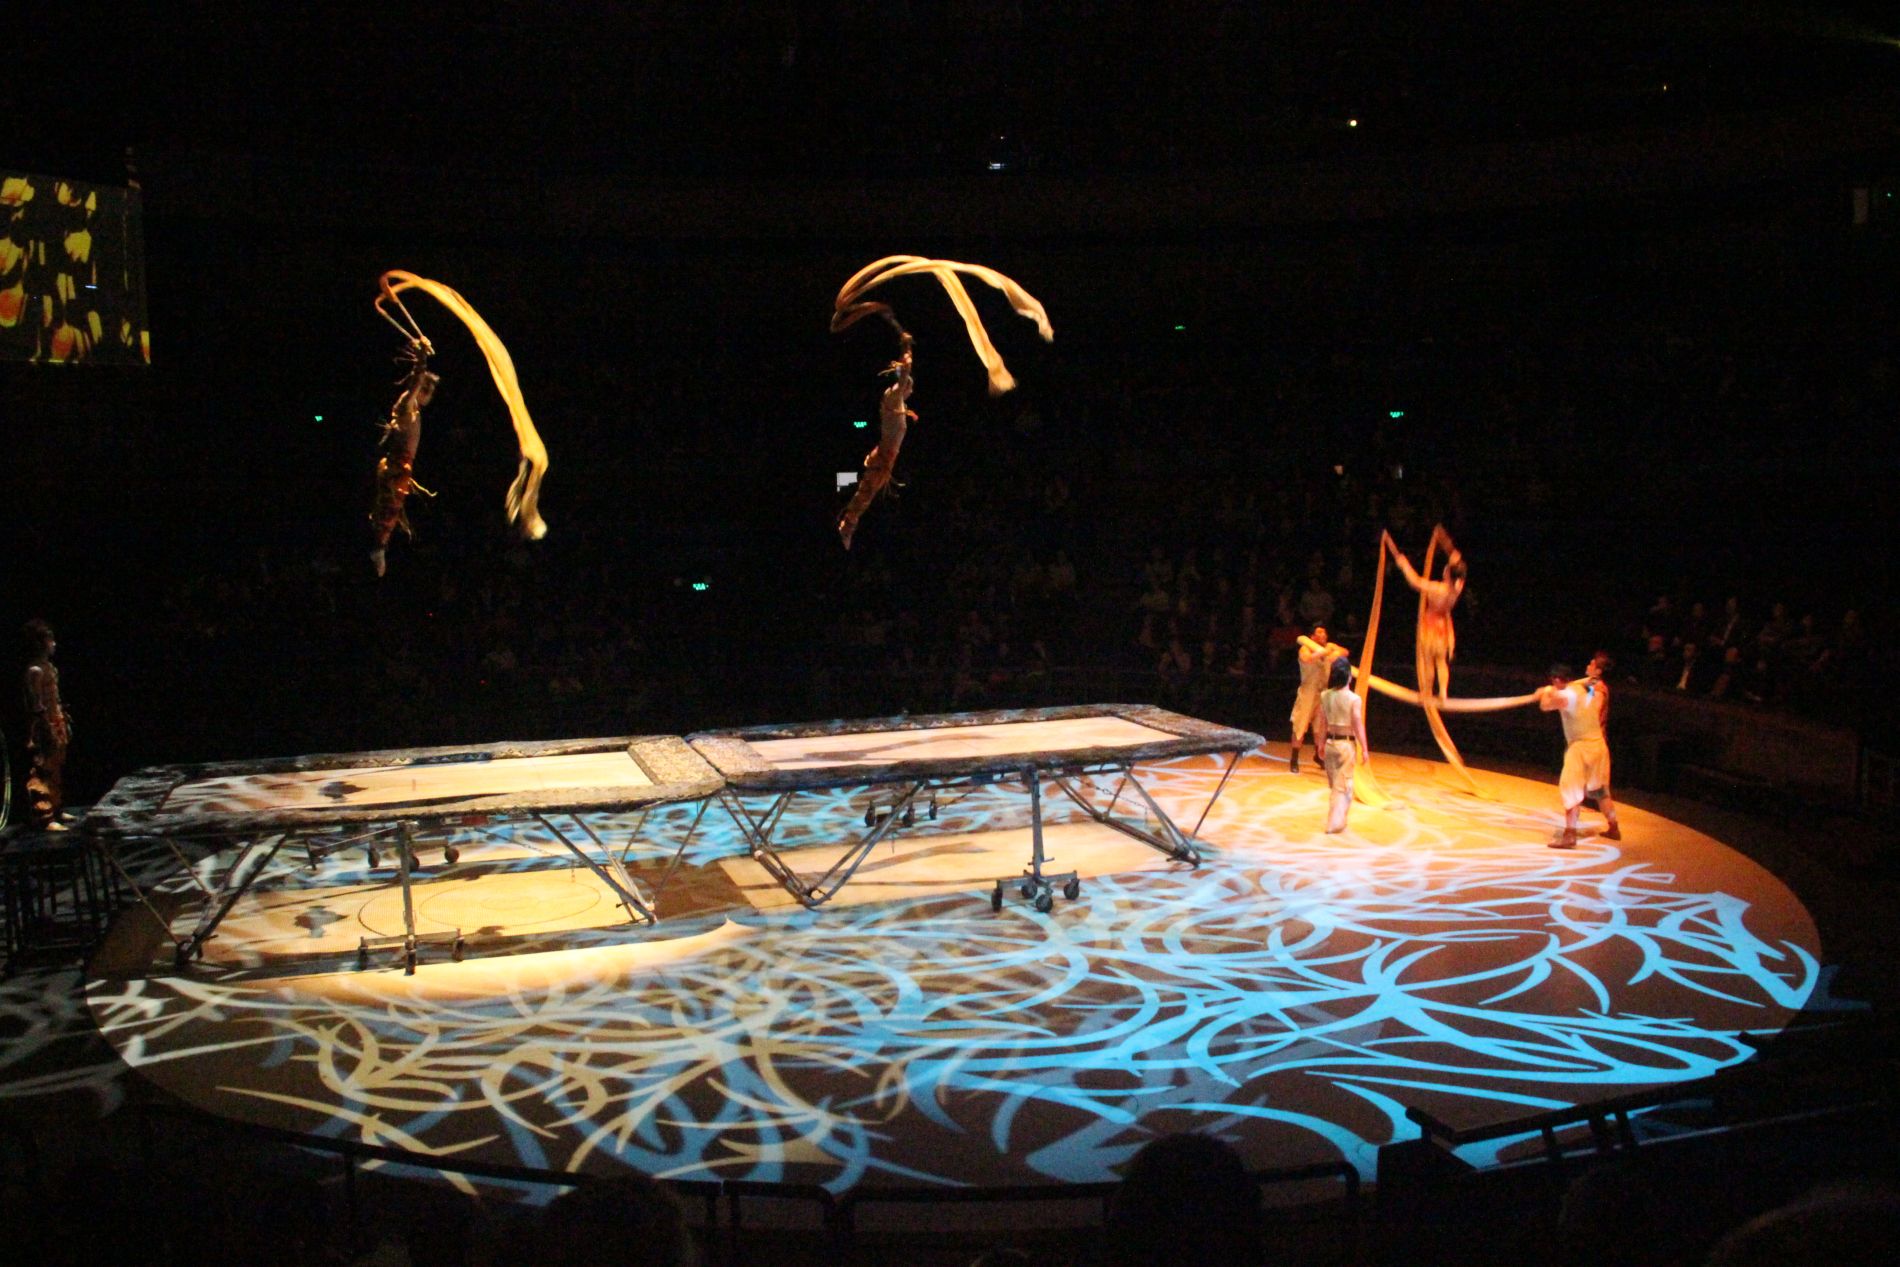 Chinese acrobats jump on trampolines at Shanghai Circus World.